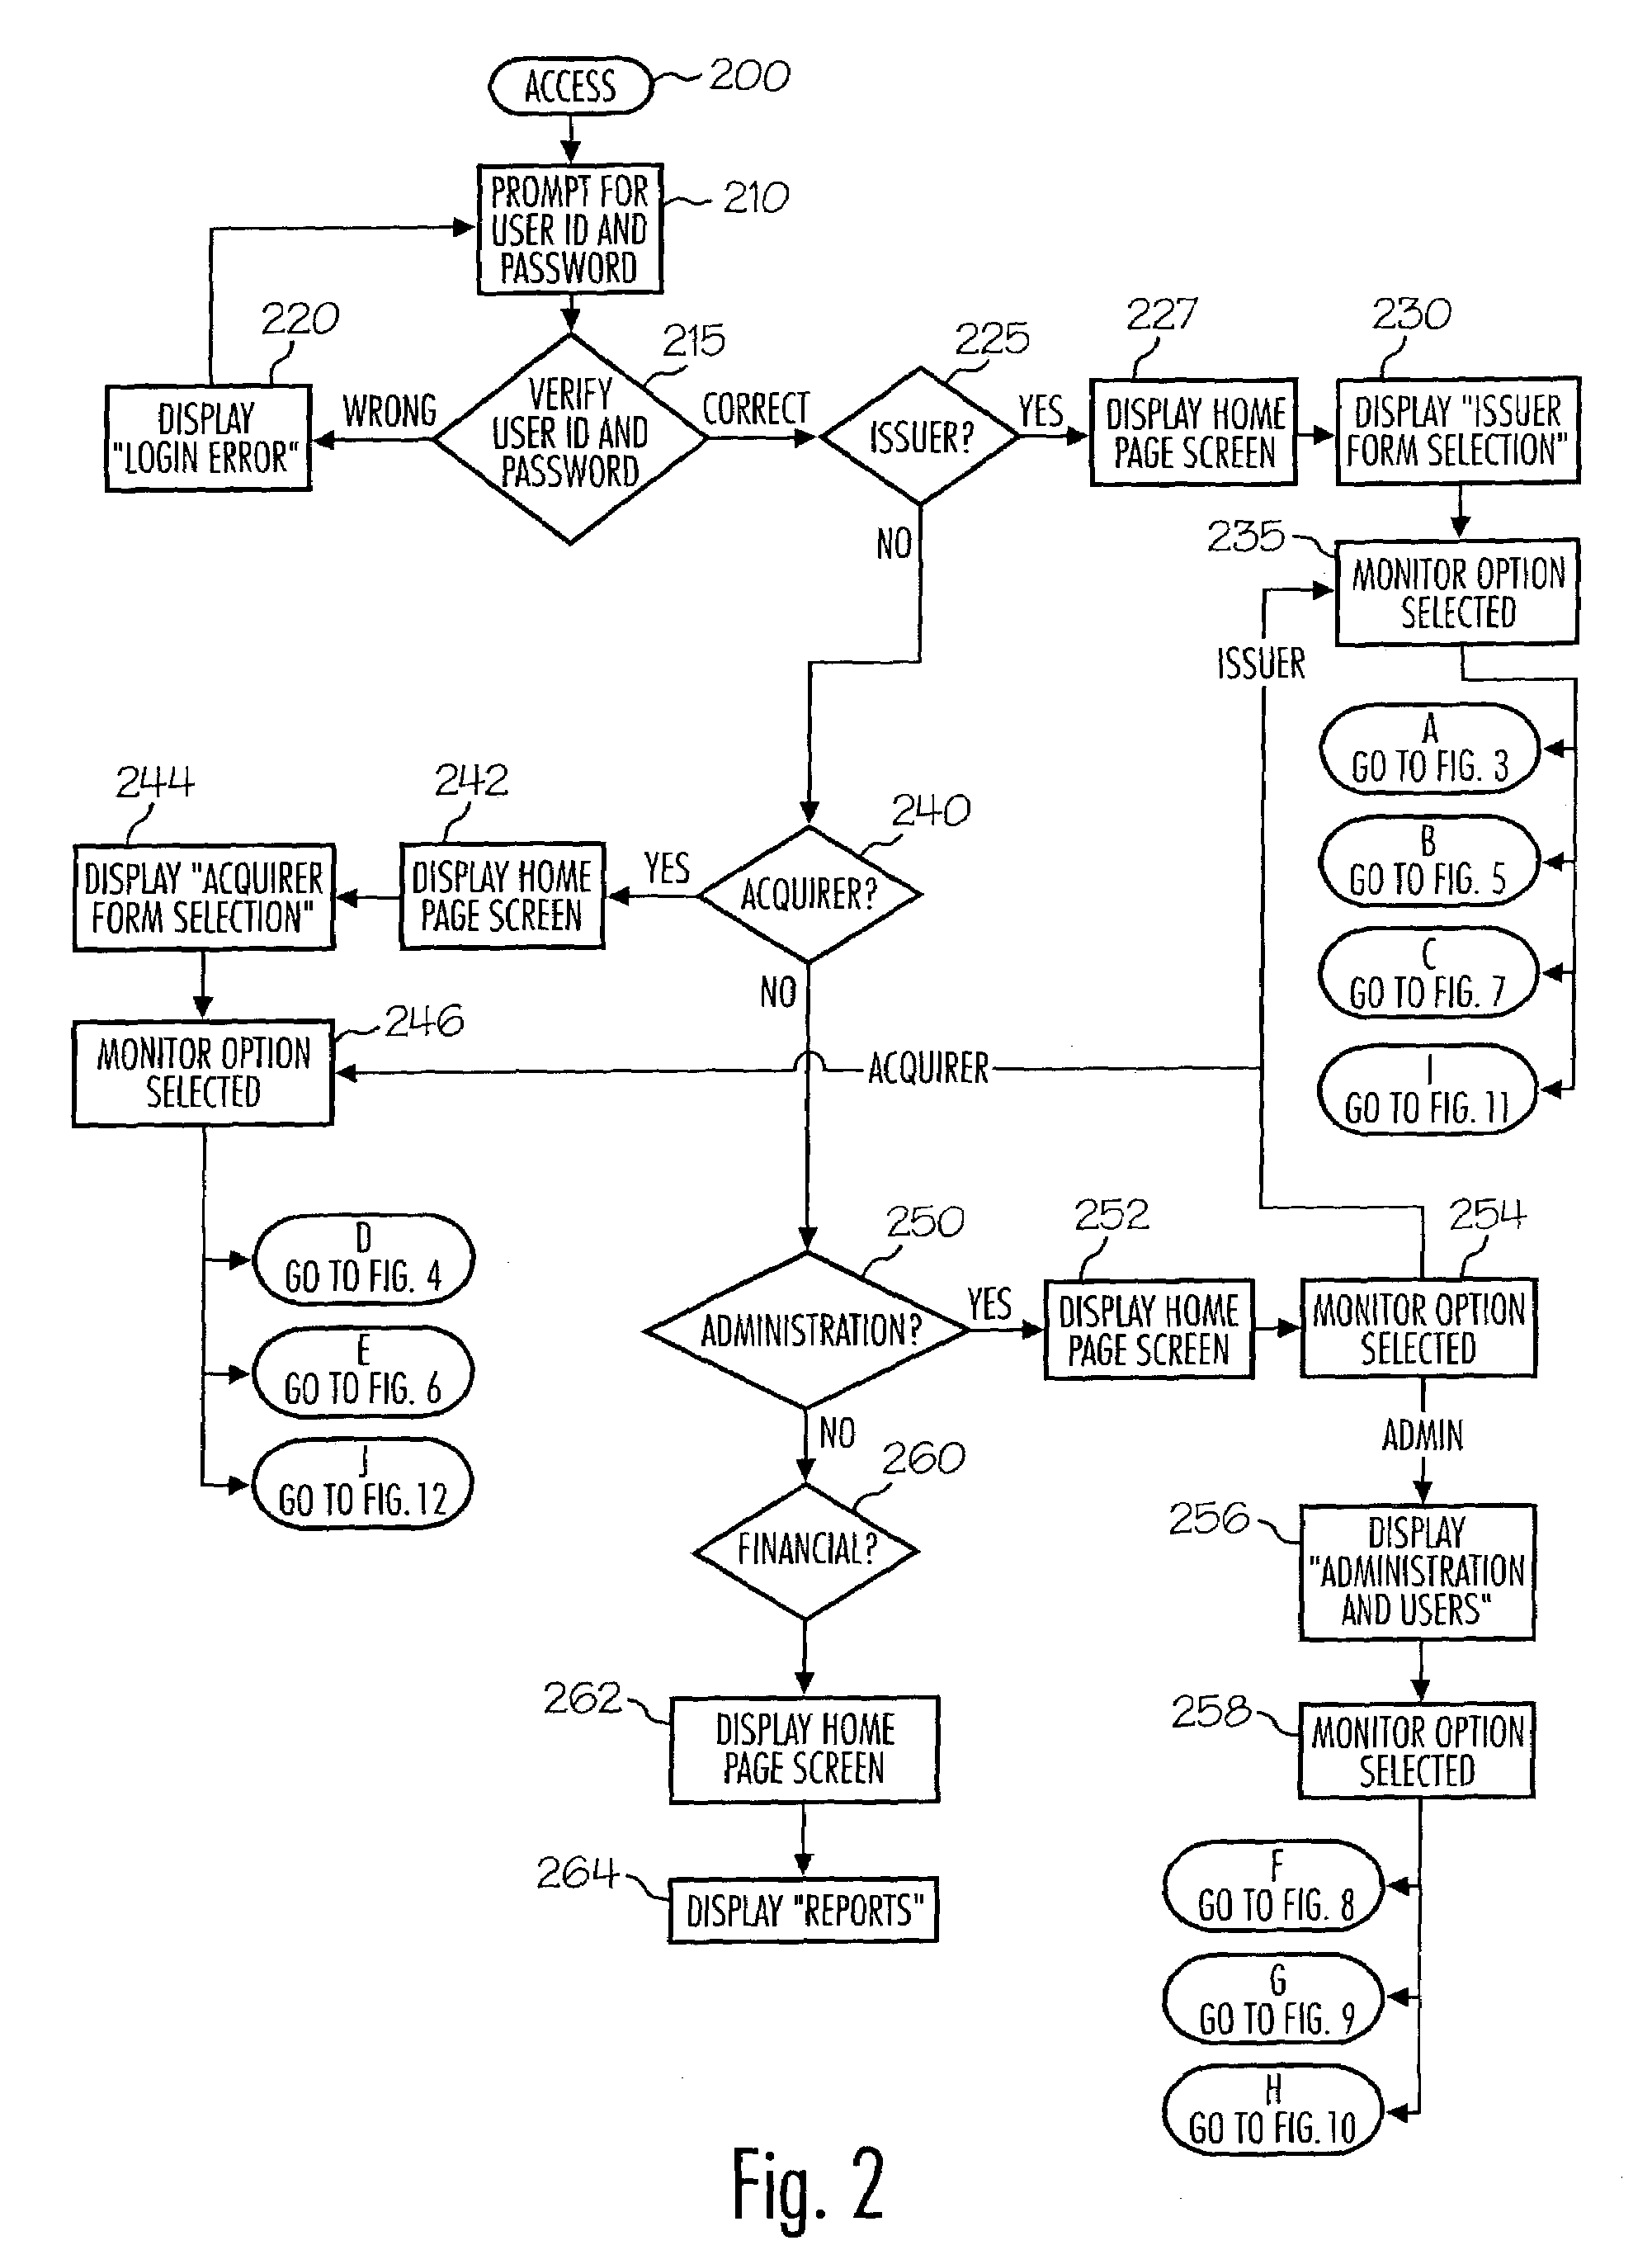 System and method for facilitating the handling of a dispute using disparate architectures